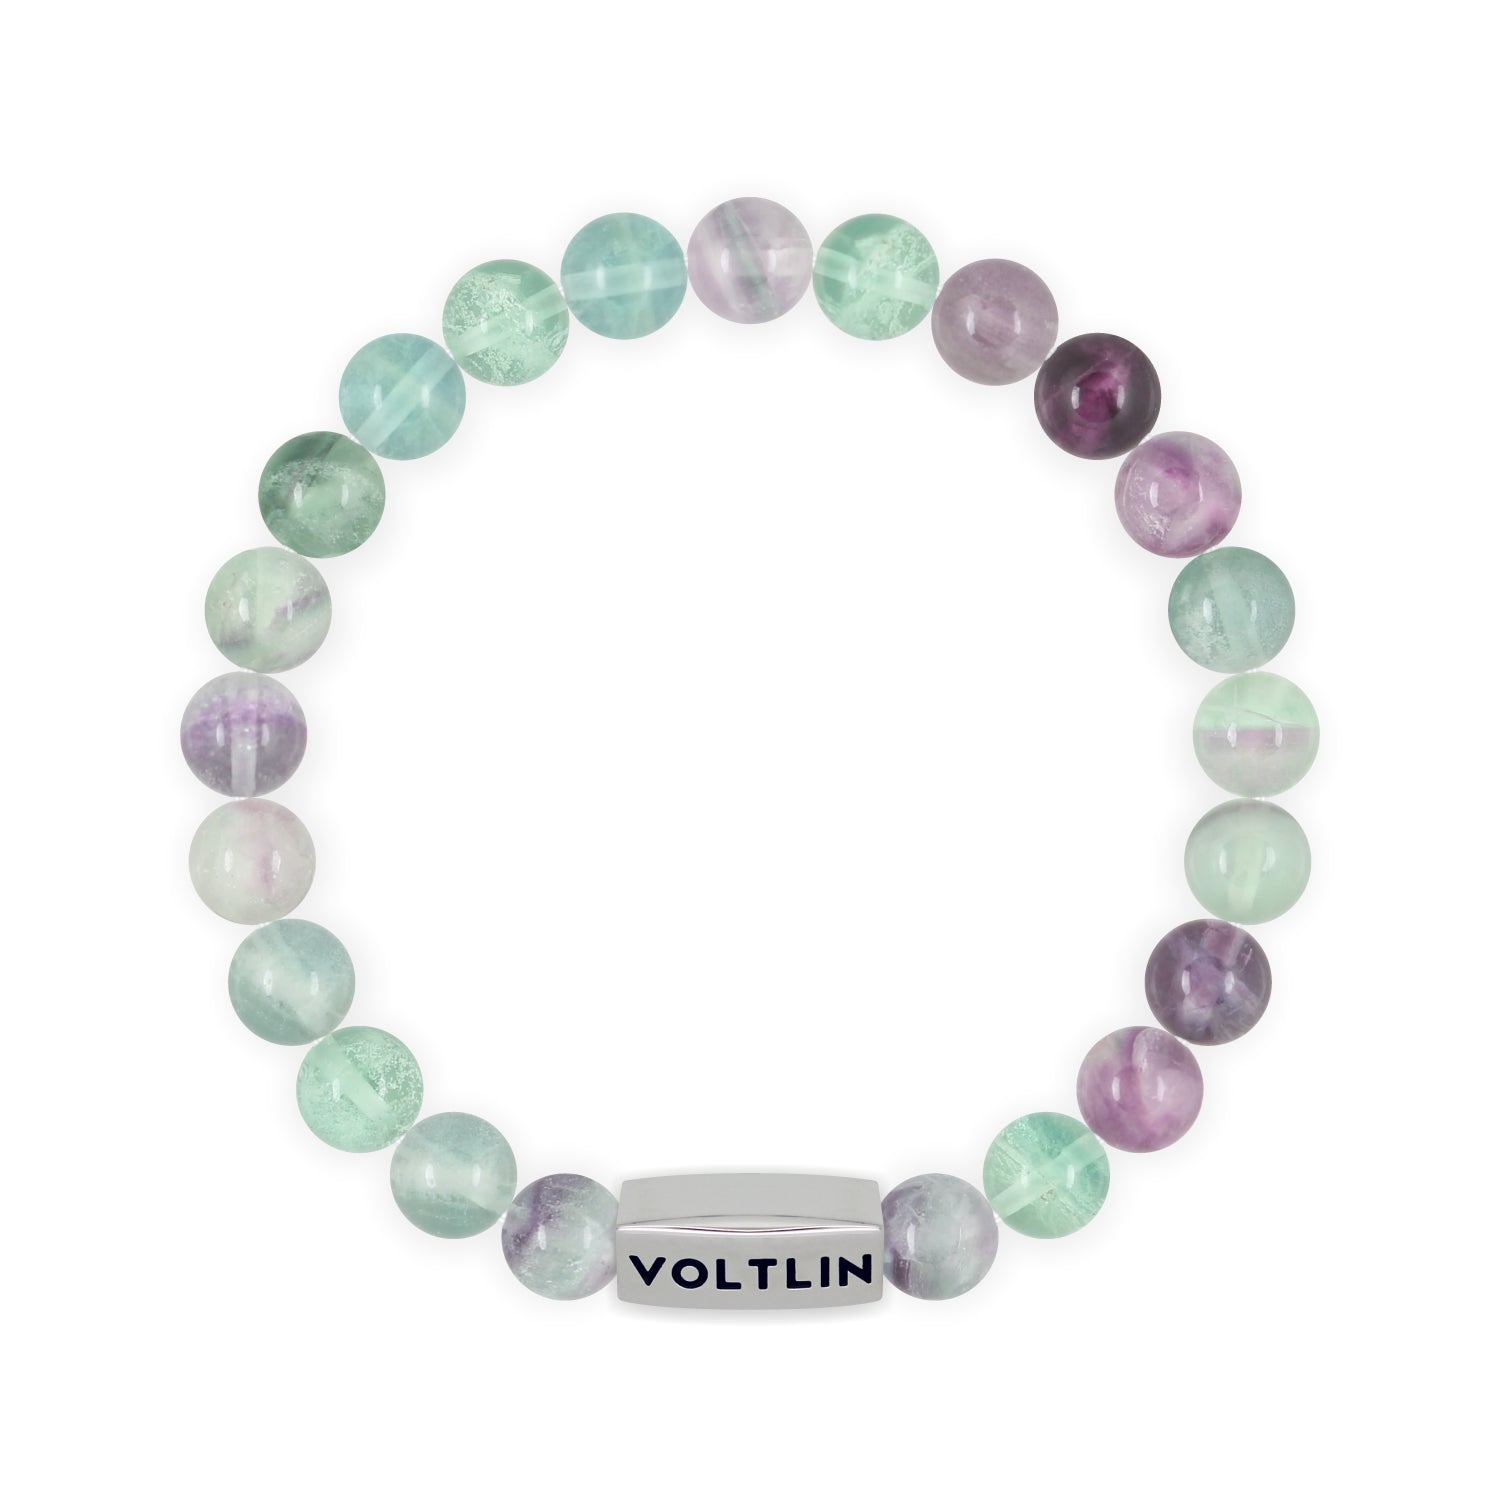 Front view of an 8mm Fluorite beaded stretch bracelet with silver stainless steel logo bead made by Voltlin